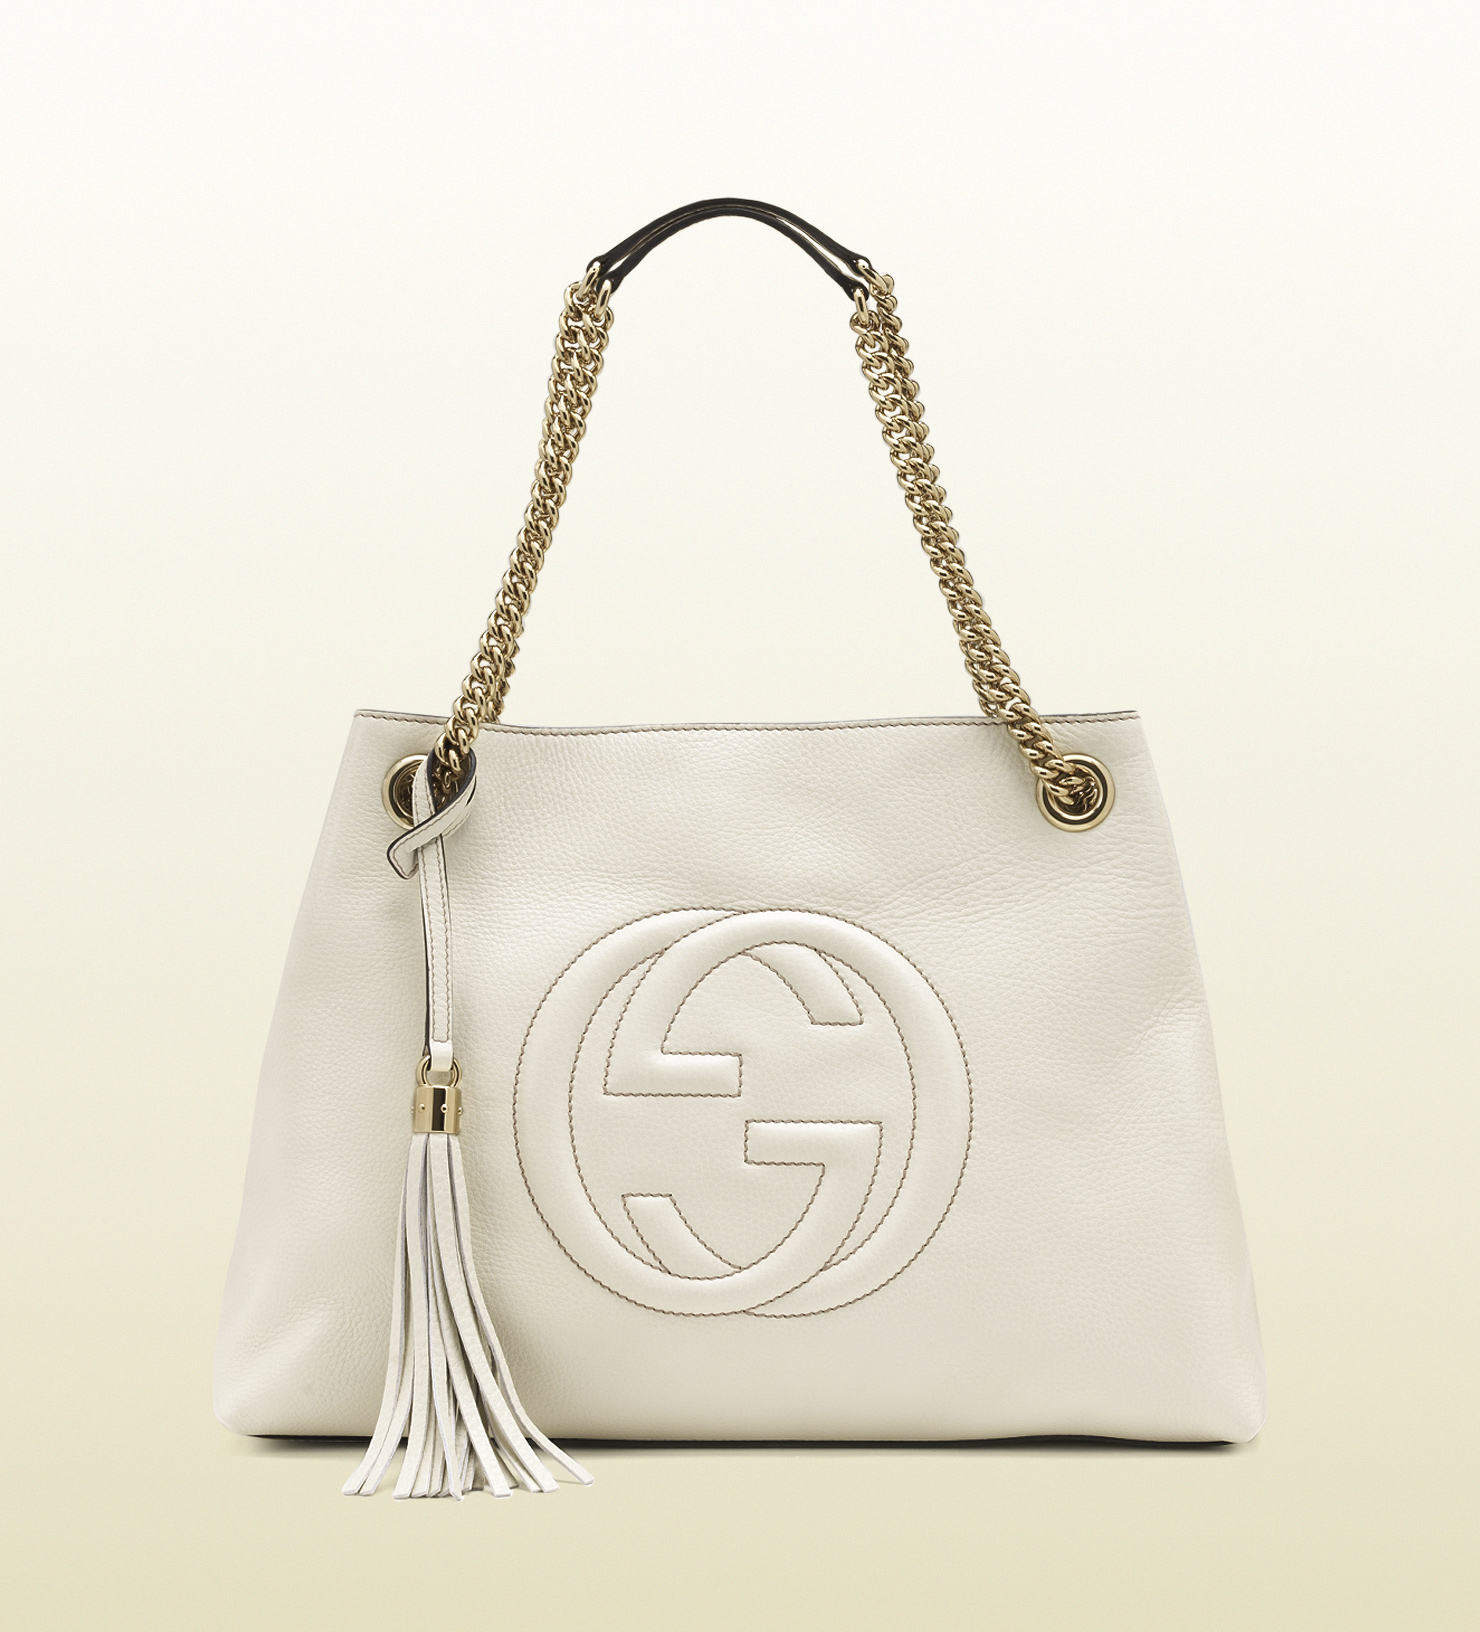 Gucci Soho Leather Shoulder Bag in White | Lyst